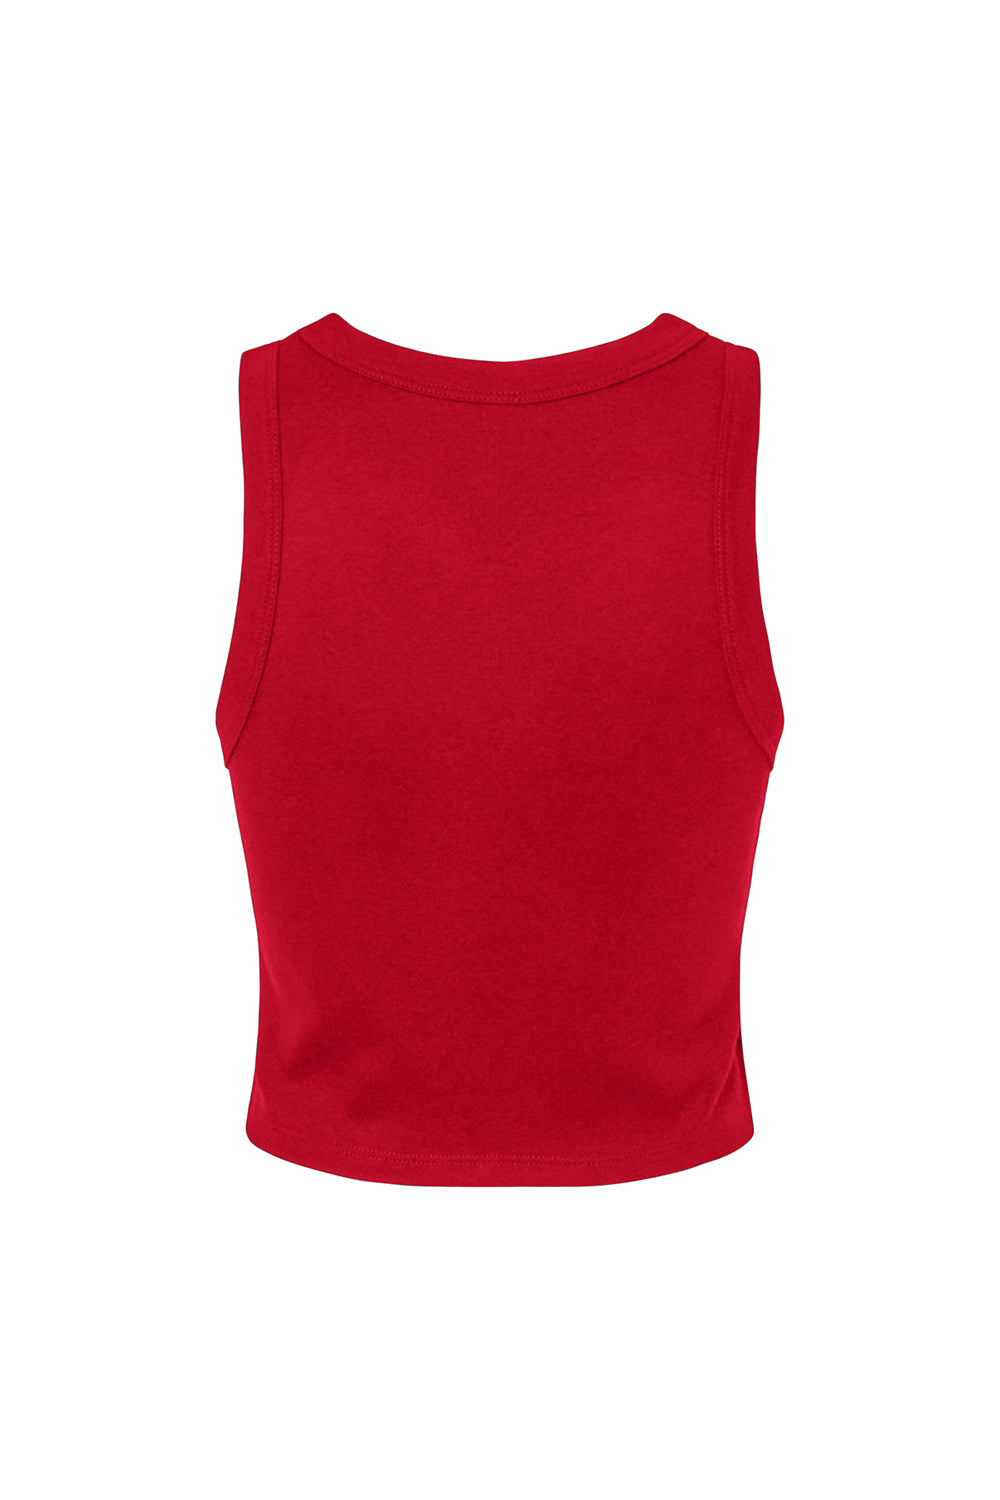 Bella + Canvas 1019 Womens Micro Ribbed Racerback Tank Top Red Flat Back